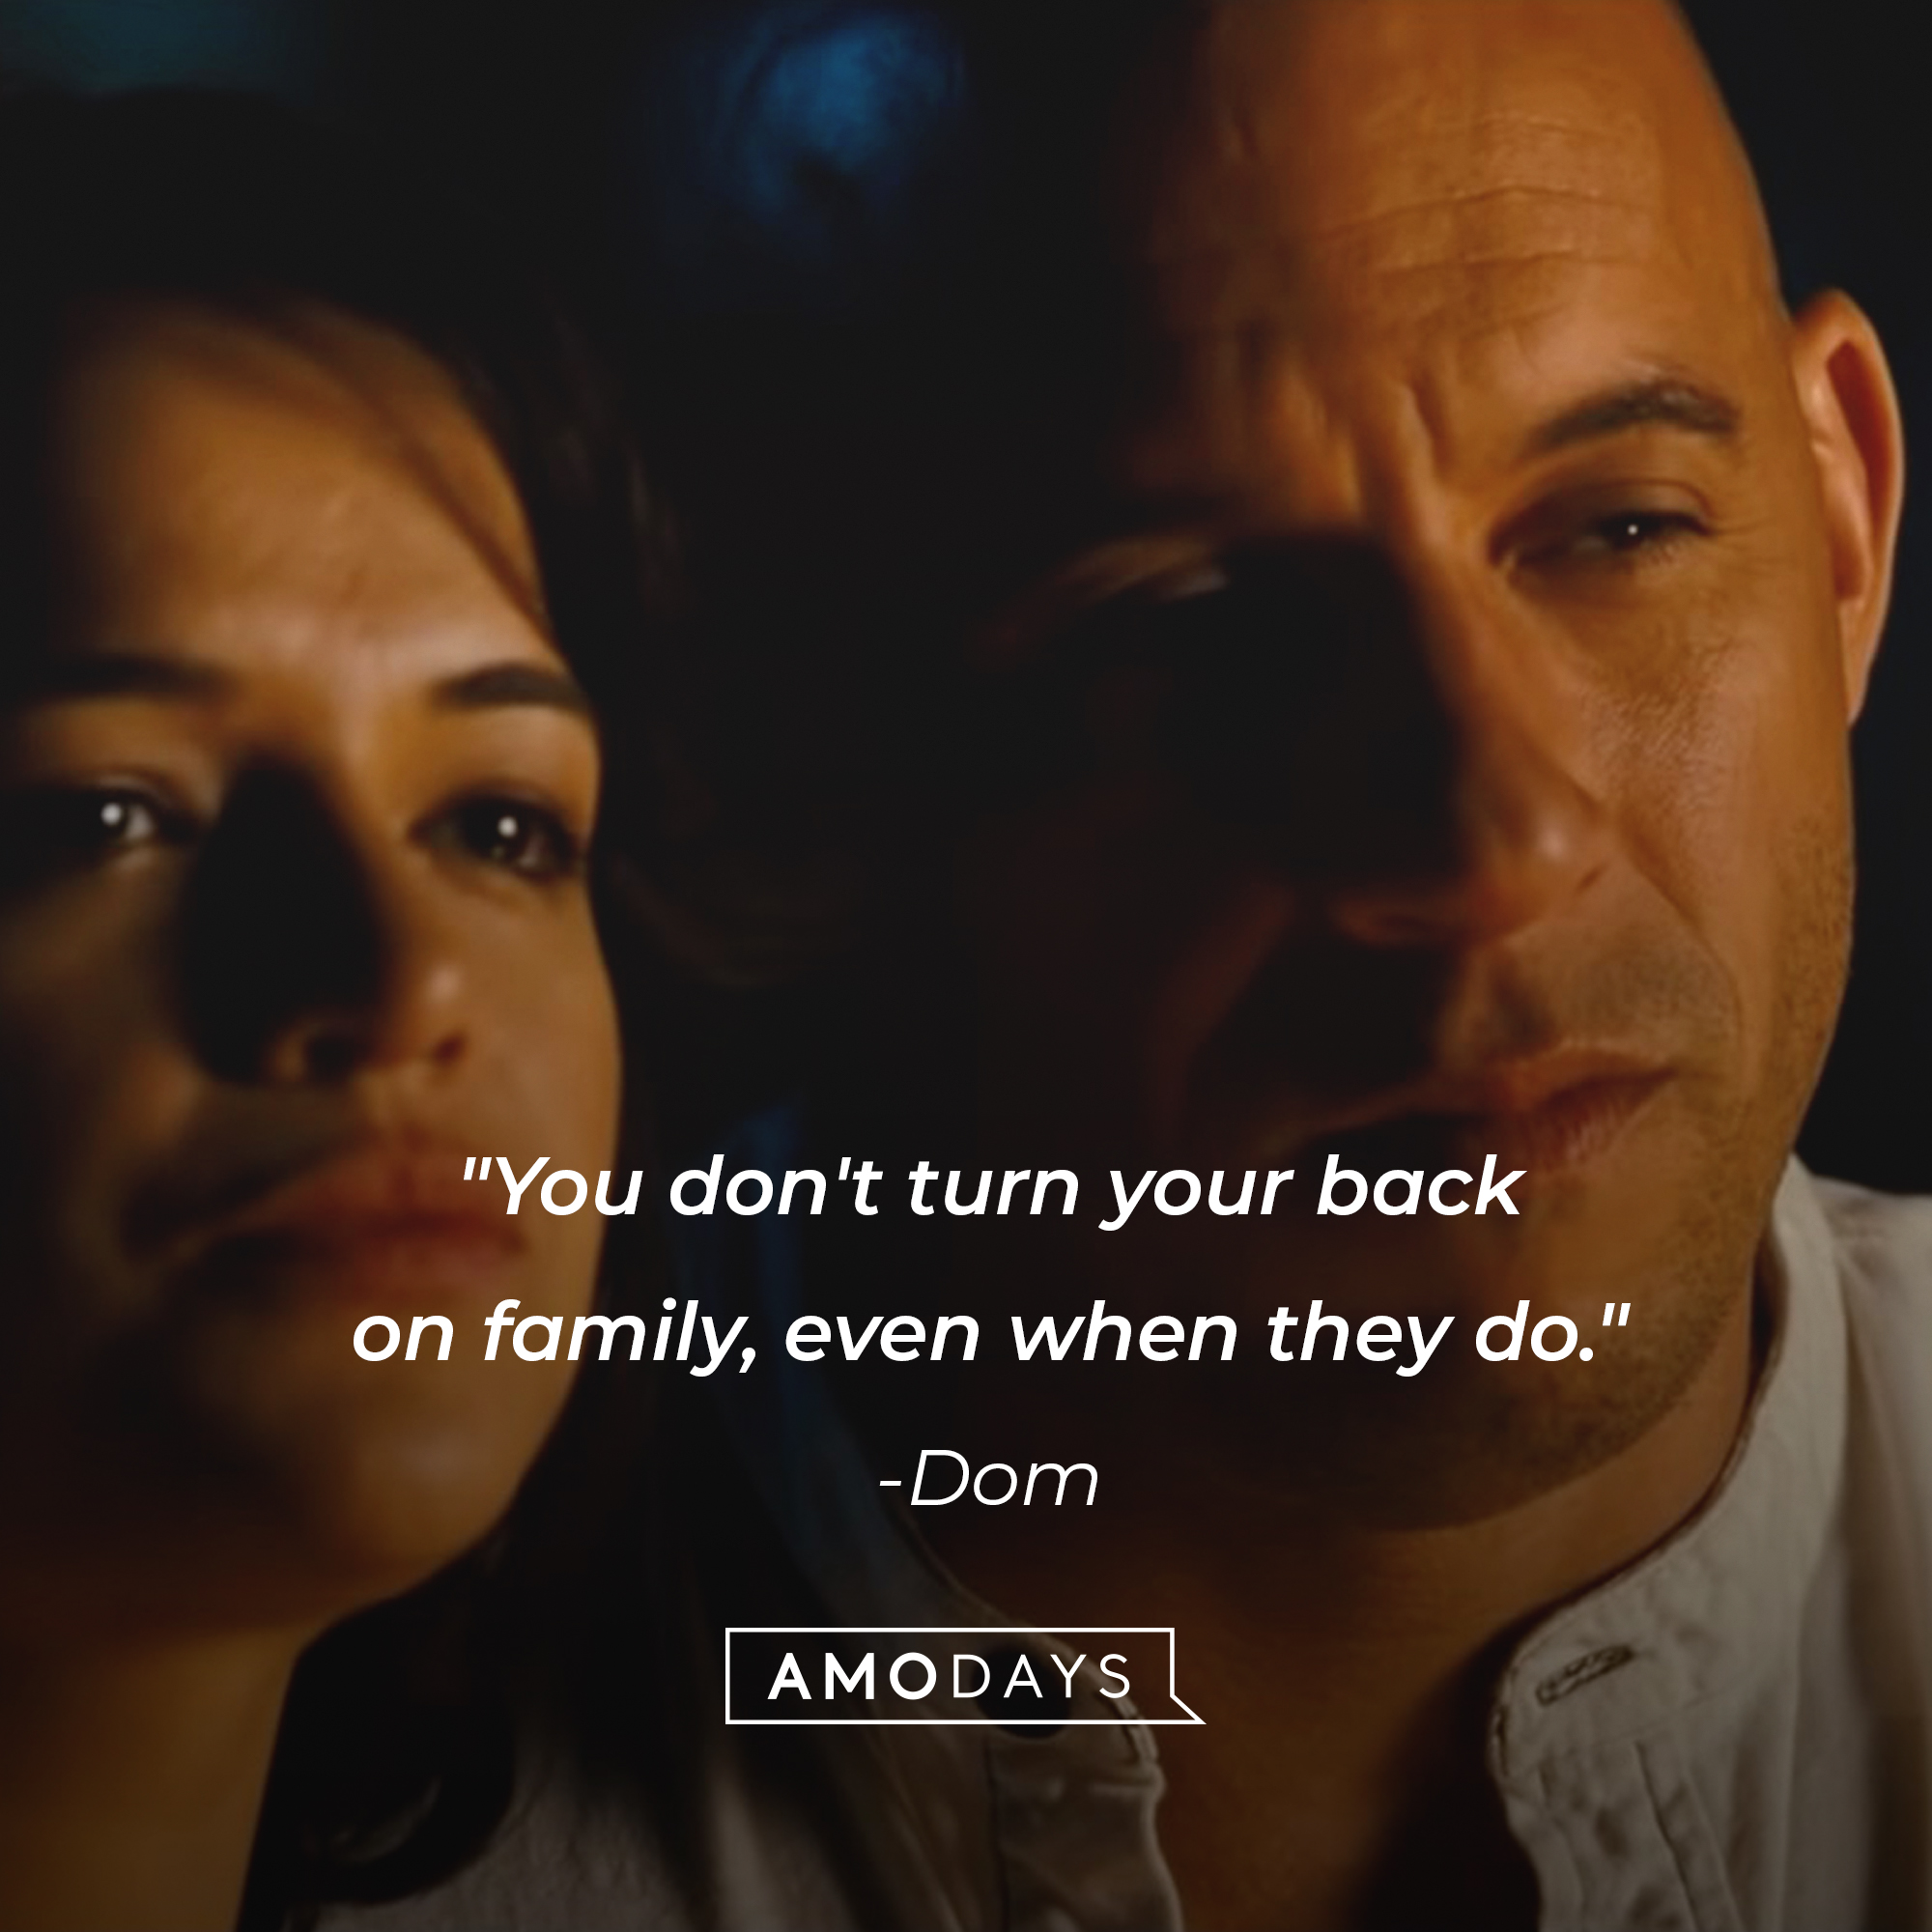 Dom's quote: "You don't turn your back on family, even when they do." | Source: facebook.com/TheFastSaga